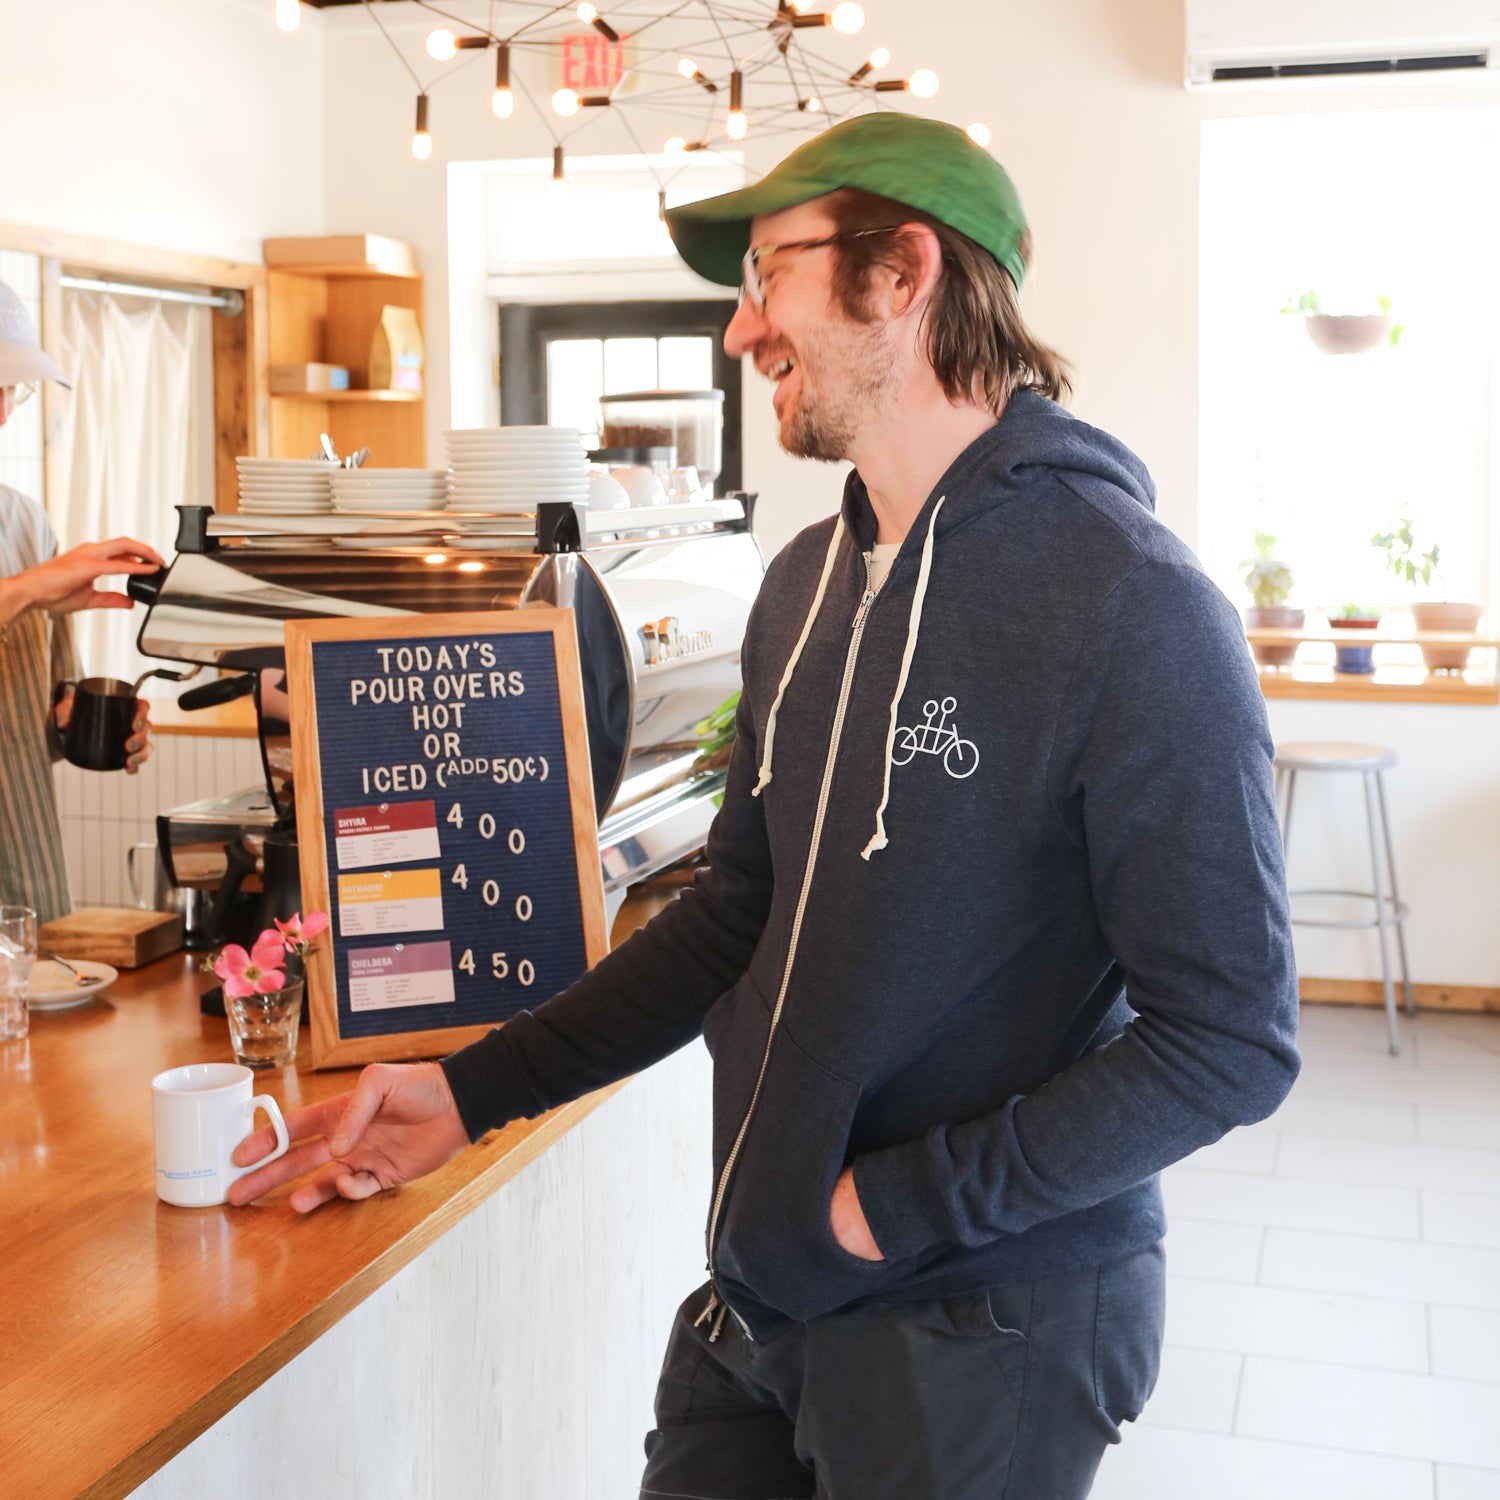 A man with glasses and a green cap sits on a brown bench against a plain white wall. He is wearing a cozy navy blue Letter Hoodie by Tandem Coffee Roasters with white drawstrings and a logo of a bicycle on the chest, along with gray shorts. His hands are clasped in his lap, and he is looking at the camera.